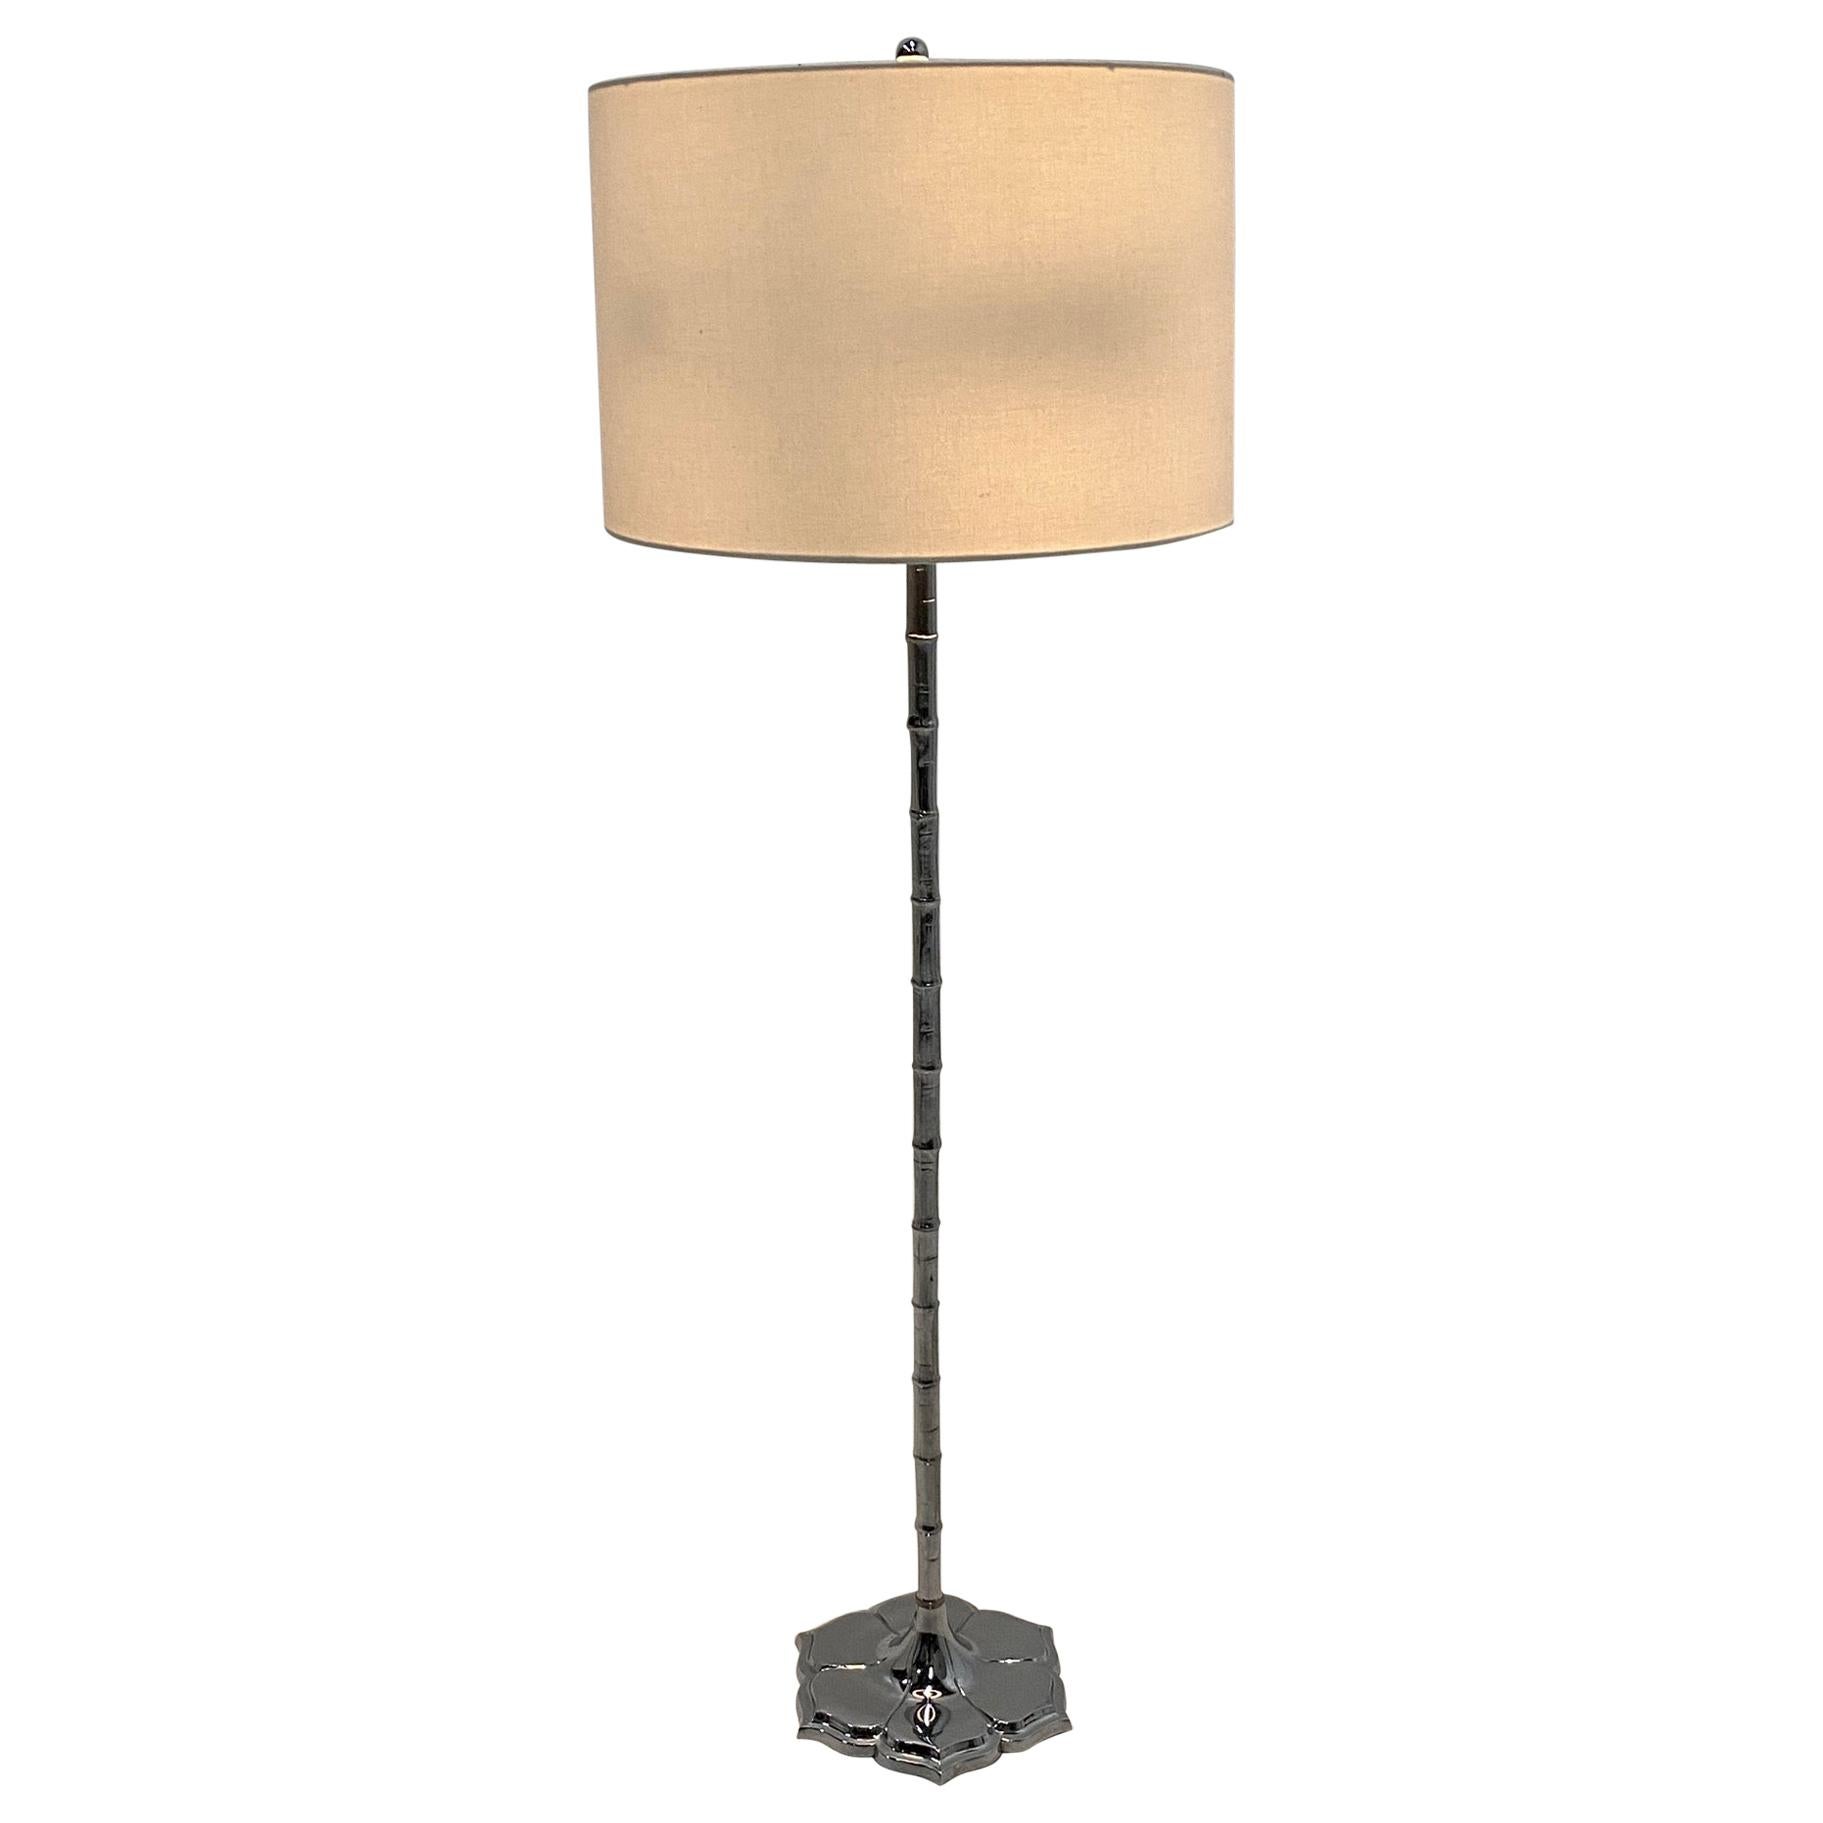 Chic Mid-Century Modern Chrome Faux Bamboo Floor Lamp For Sale